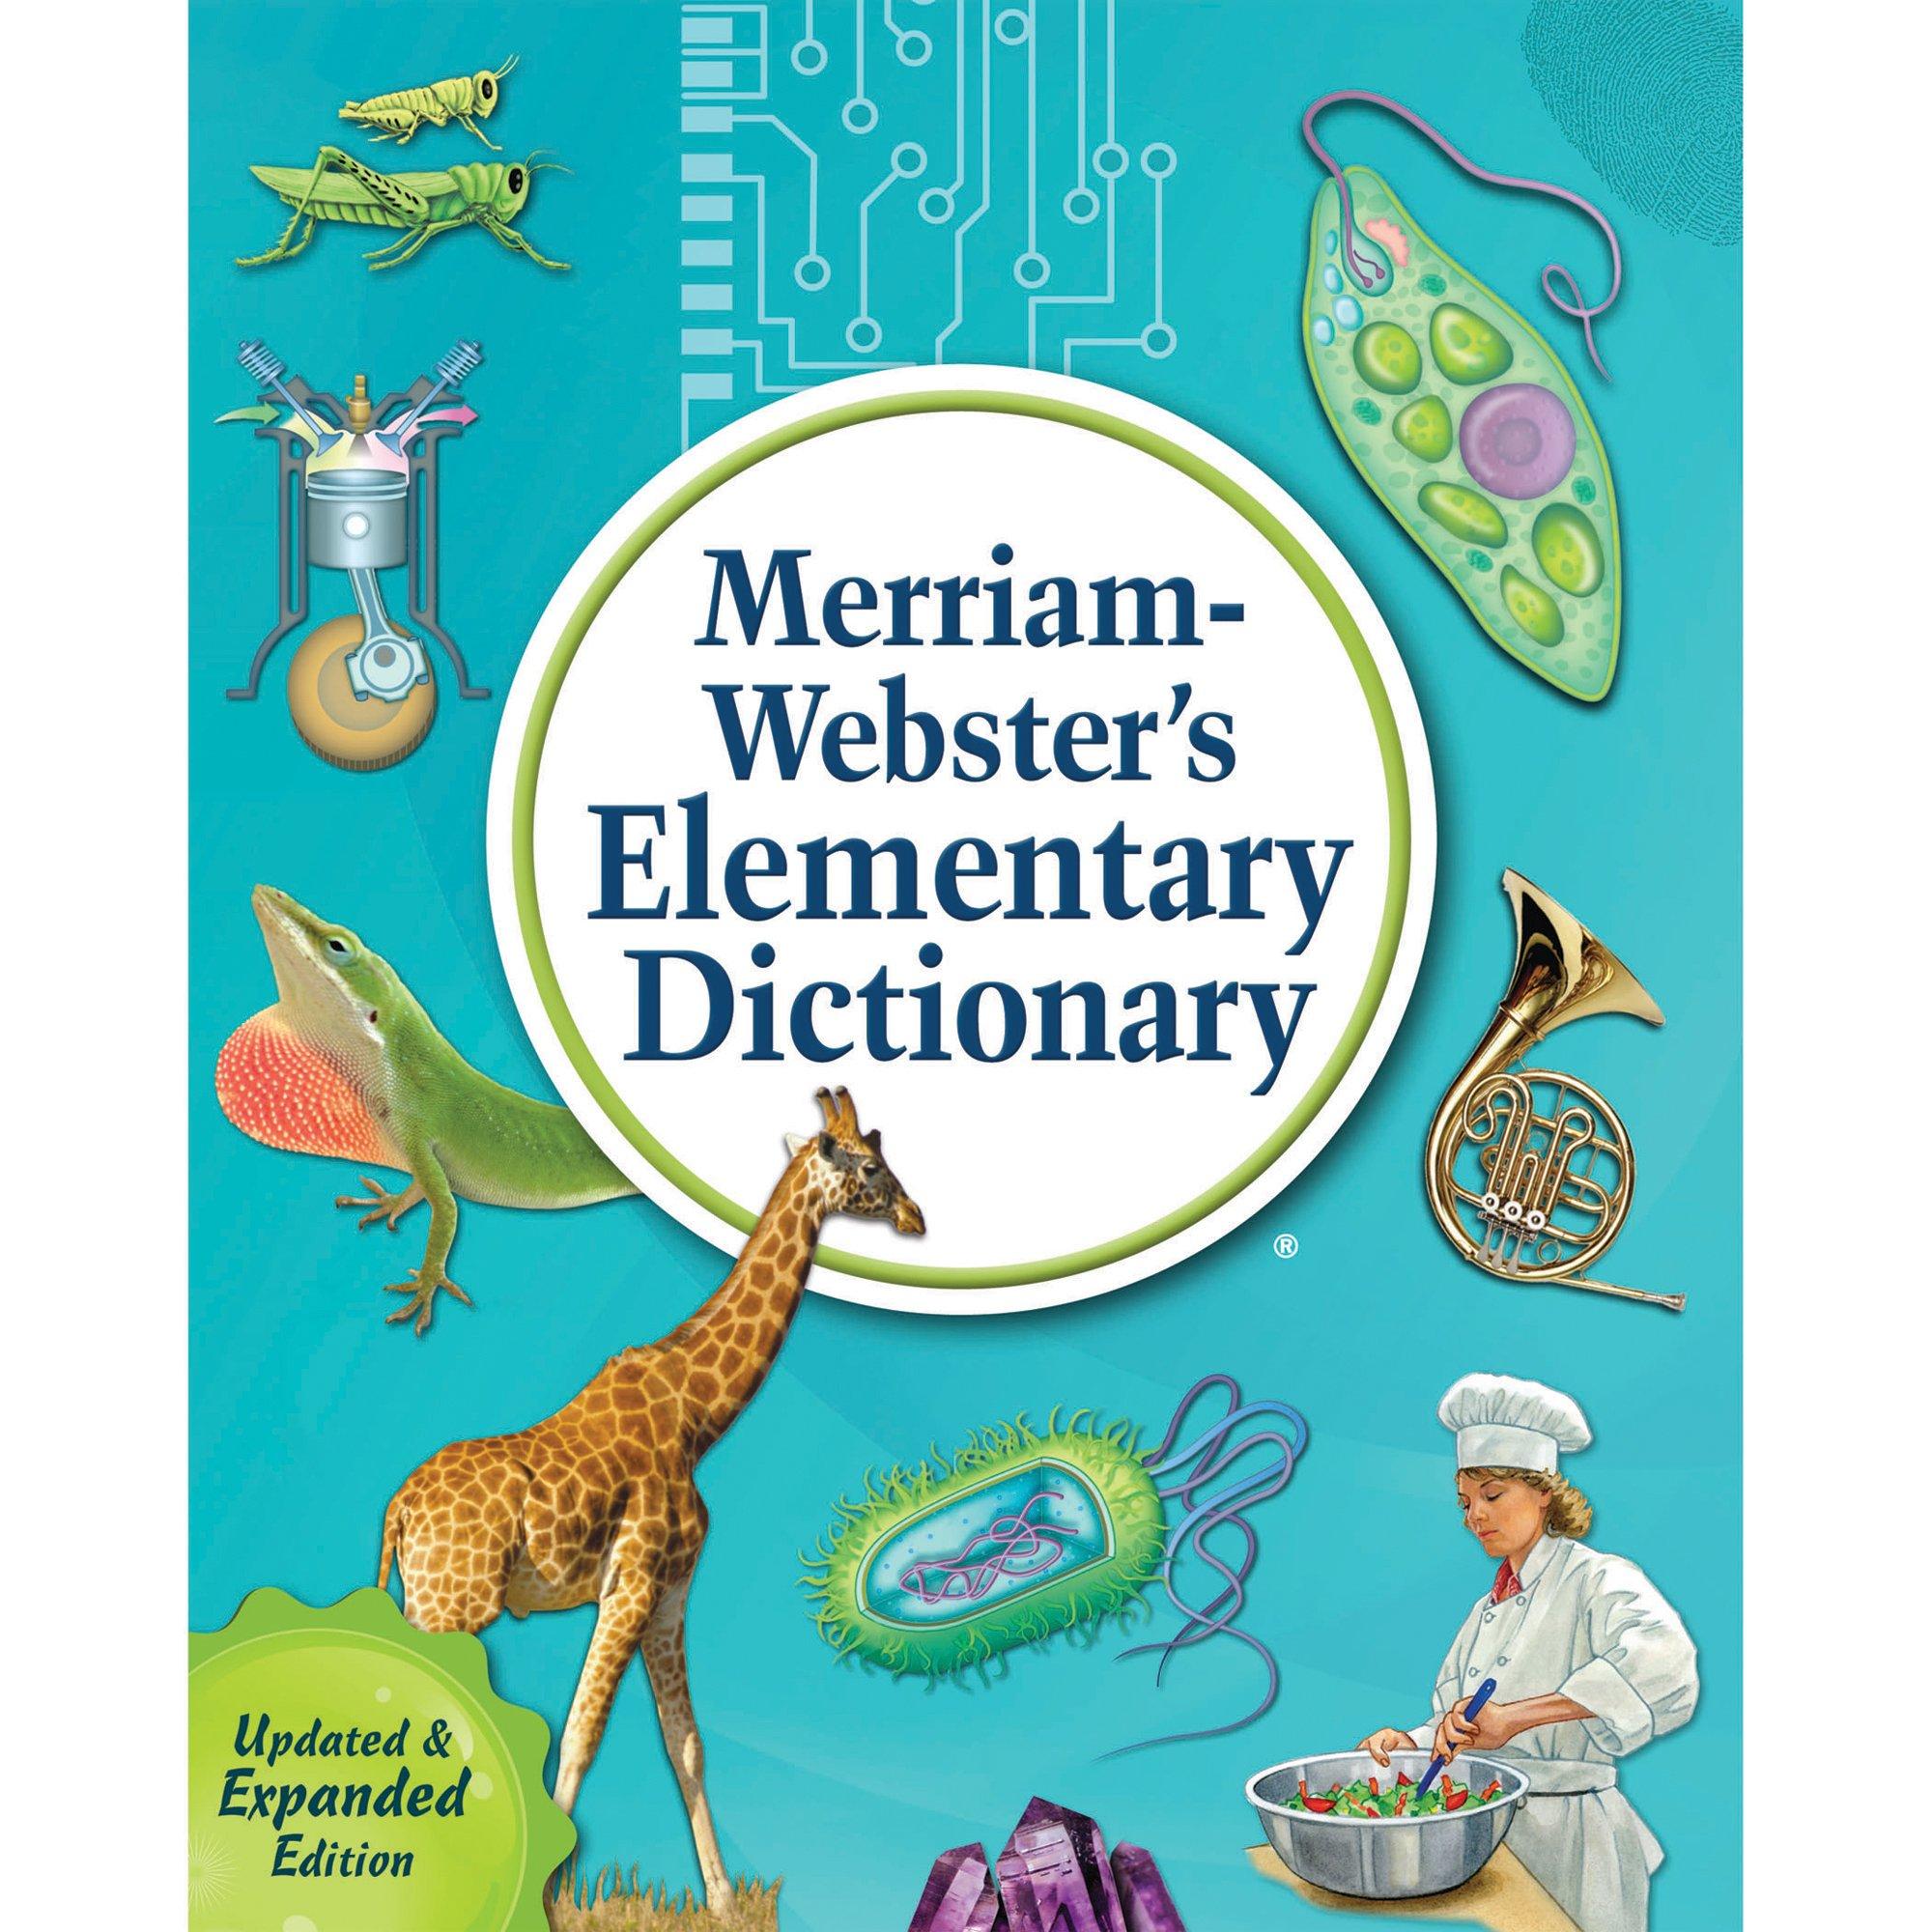 Merriam-Websters Elementary Dictionary Hardcover Book for $9.16